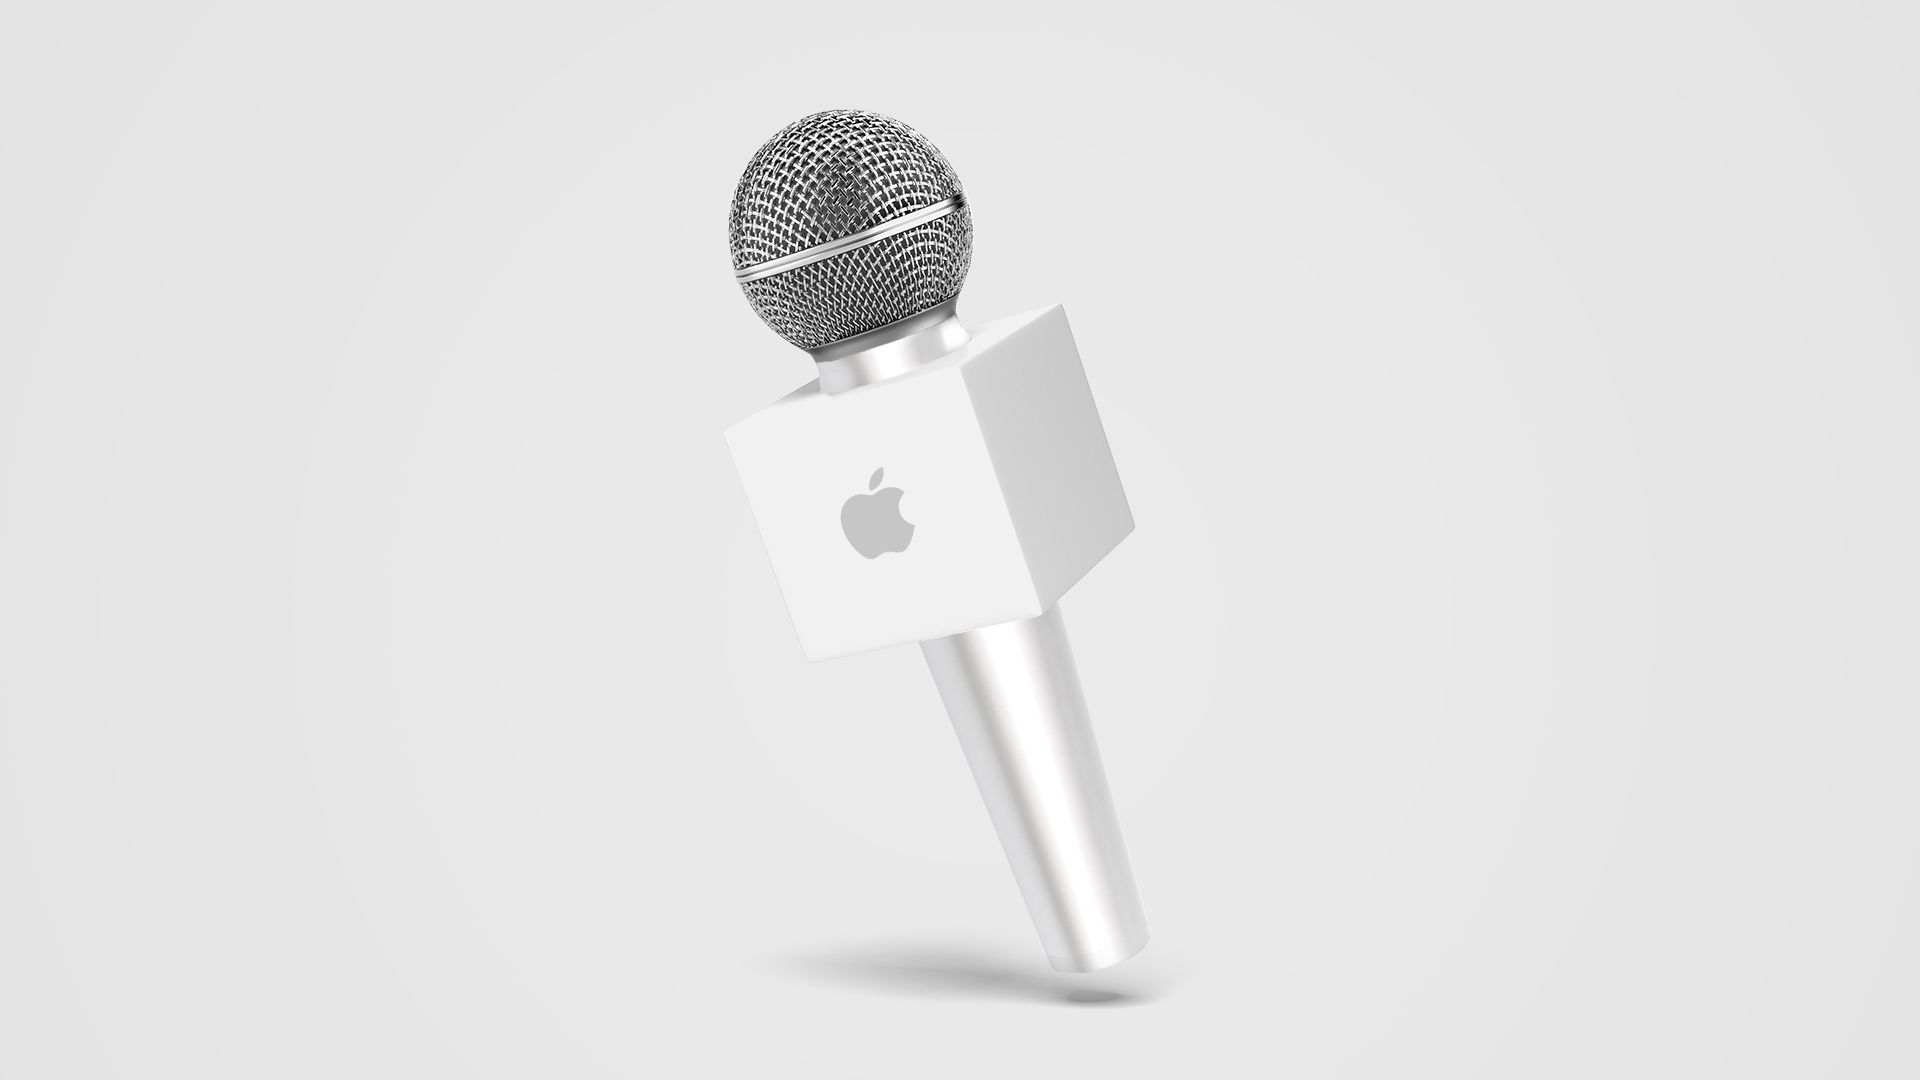 Illustration of a microphone with the Apple logo on it